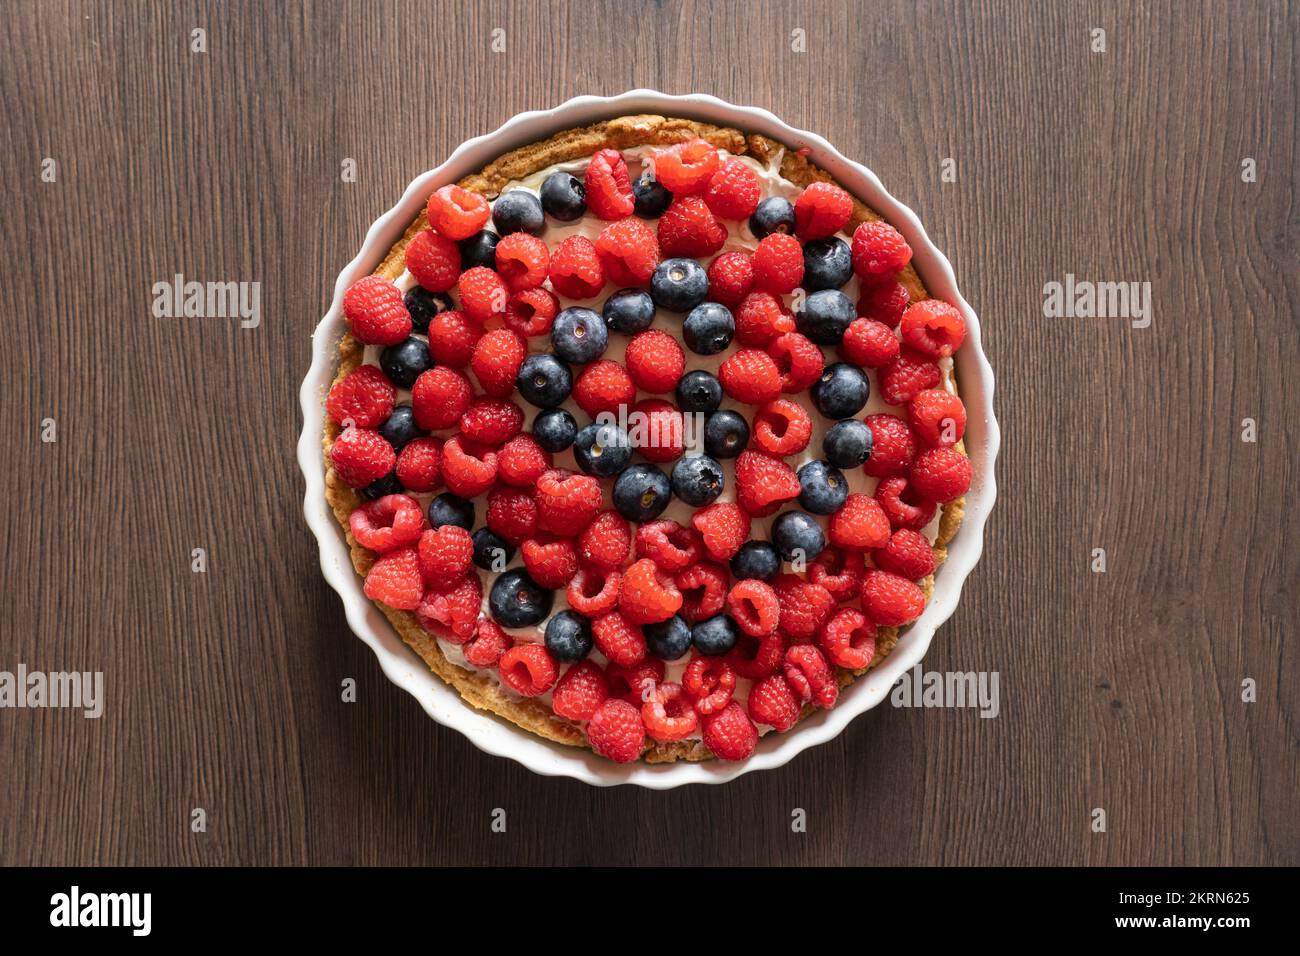 Delicious home made raspberry and blueberry mixed fruit pastry tart dessert in a white ceramic dish on a kitchen worktop Stock Photo